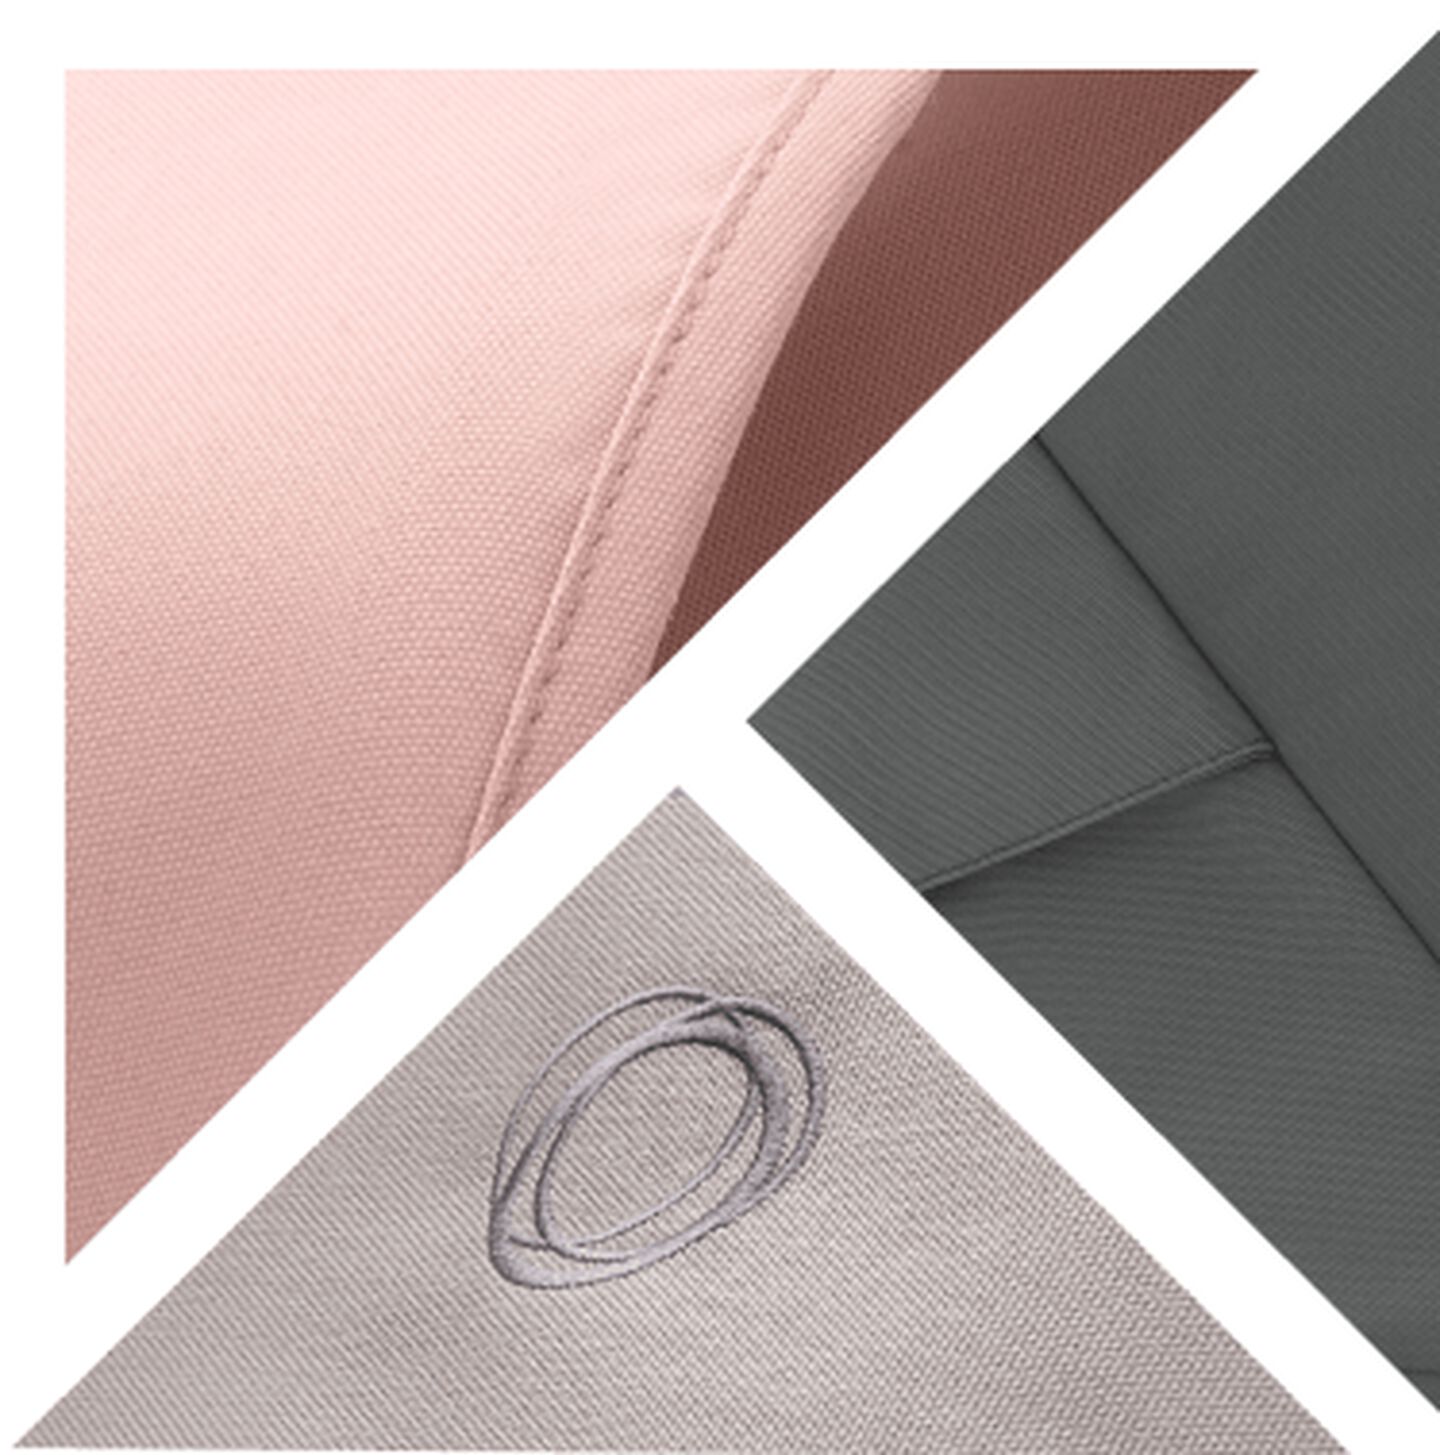 Three types of Fox 3 fabric; one in pink, one in white with the Bugaboo logo, one in black.